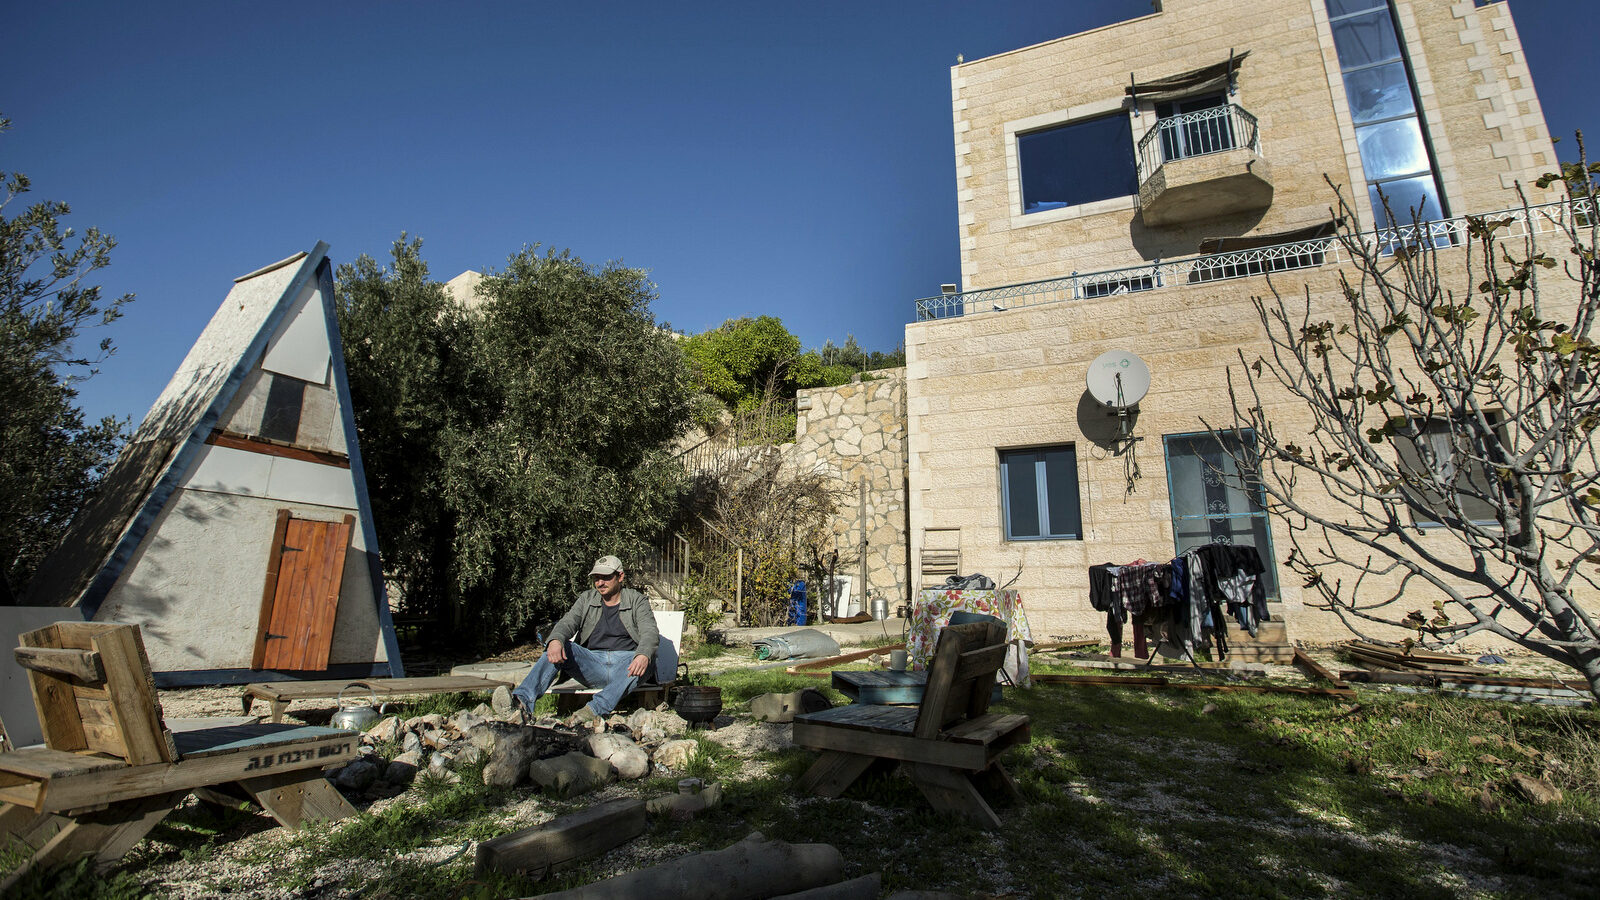 Moshe Gordon sits outside his guest house advertised on Airbnb international home-sharing site in Nofei Prat settlement in the Palestinian West Bank, Sunday, Jan. 17, 2016. (Photo: Tsafrir Abayov/AP)